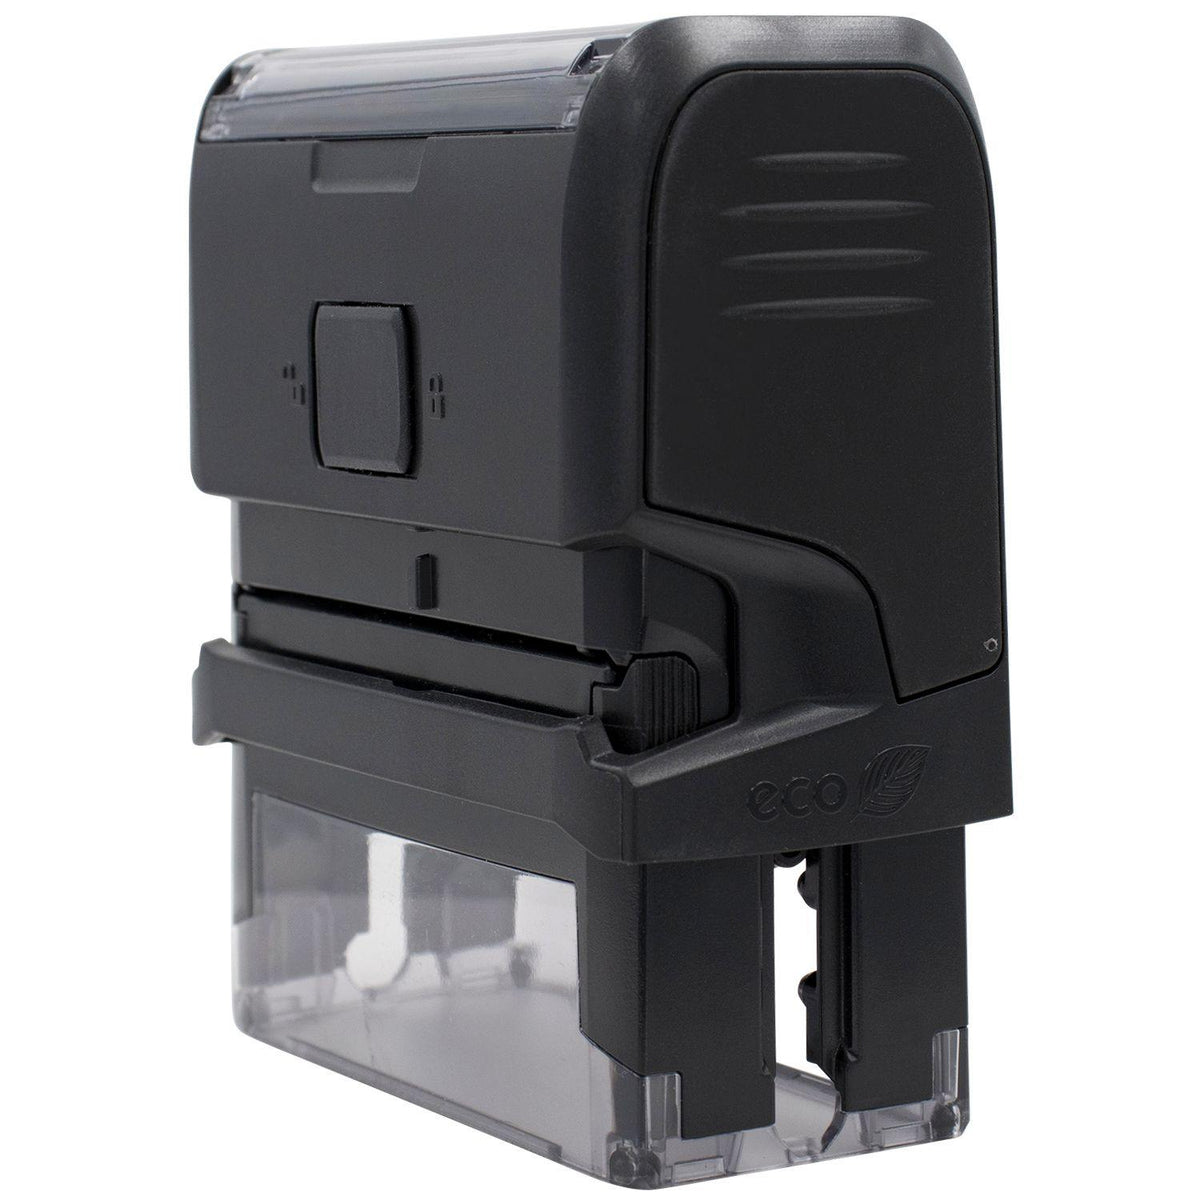 Side View of Large Self-Inking Archivar Stamp at an Angle